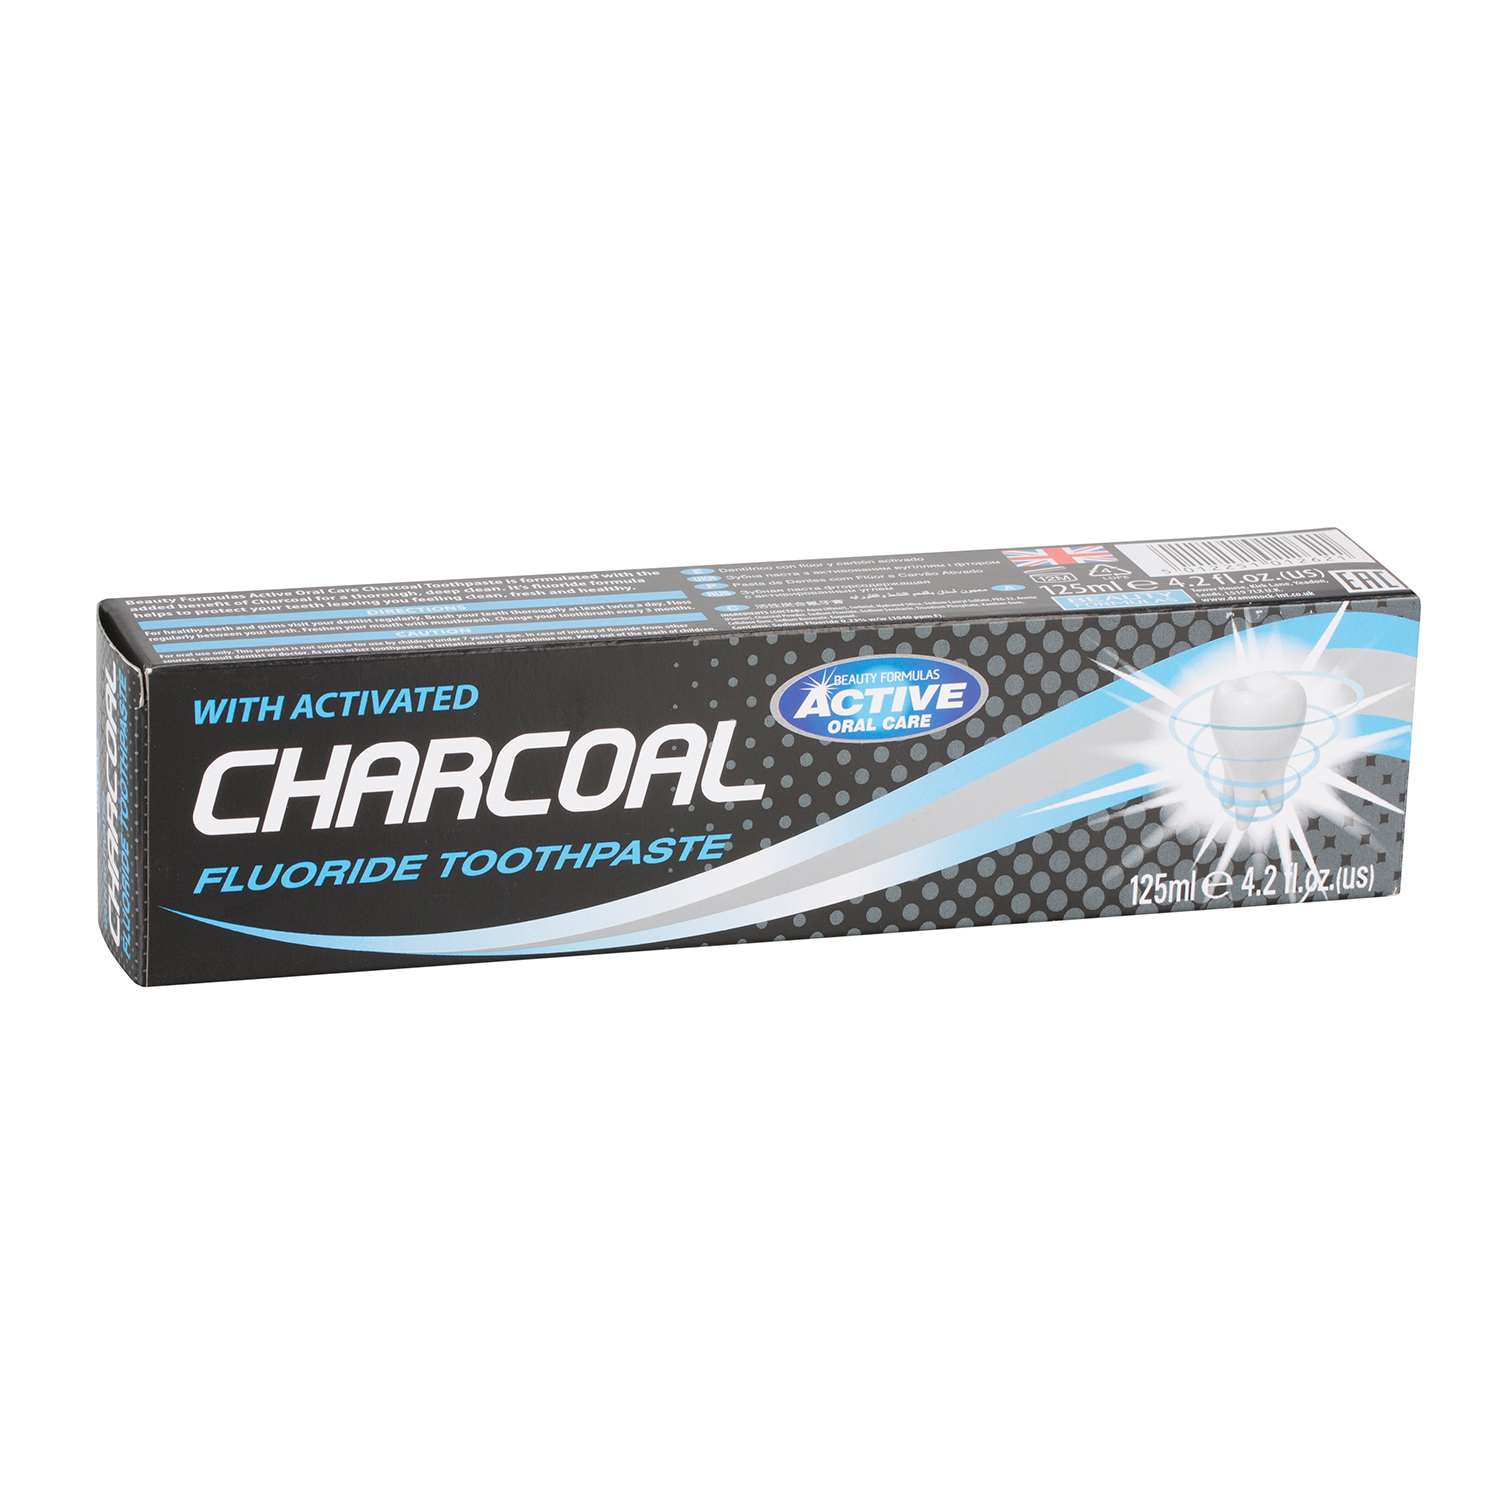 Beauty Formulas Active Charcoal Fluoride Toothpaste Image 1